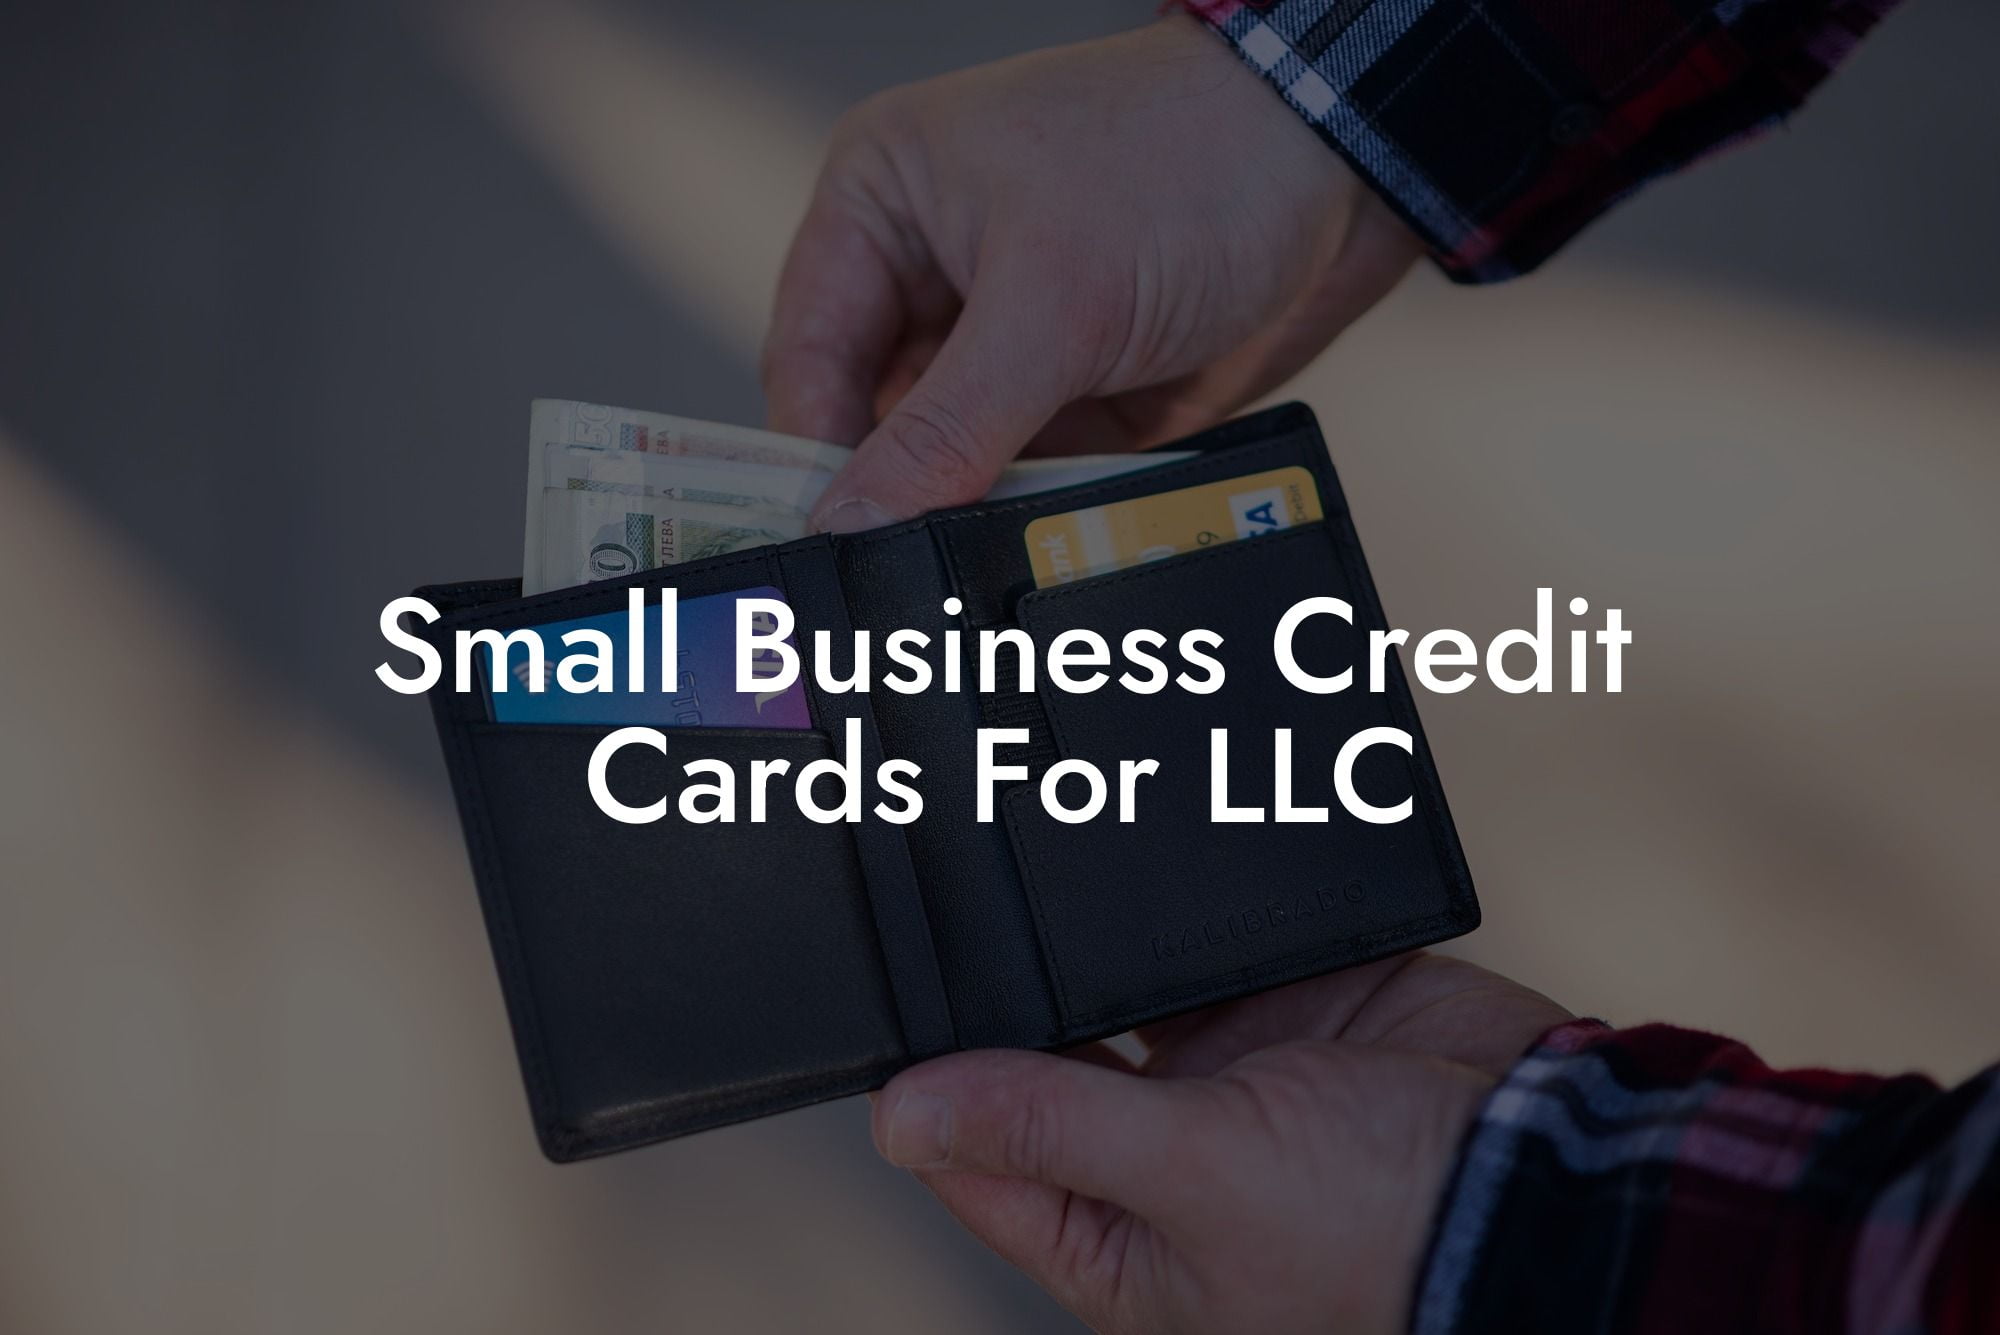 Small Business Credit Cards For LLC